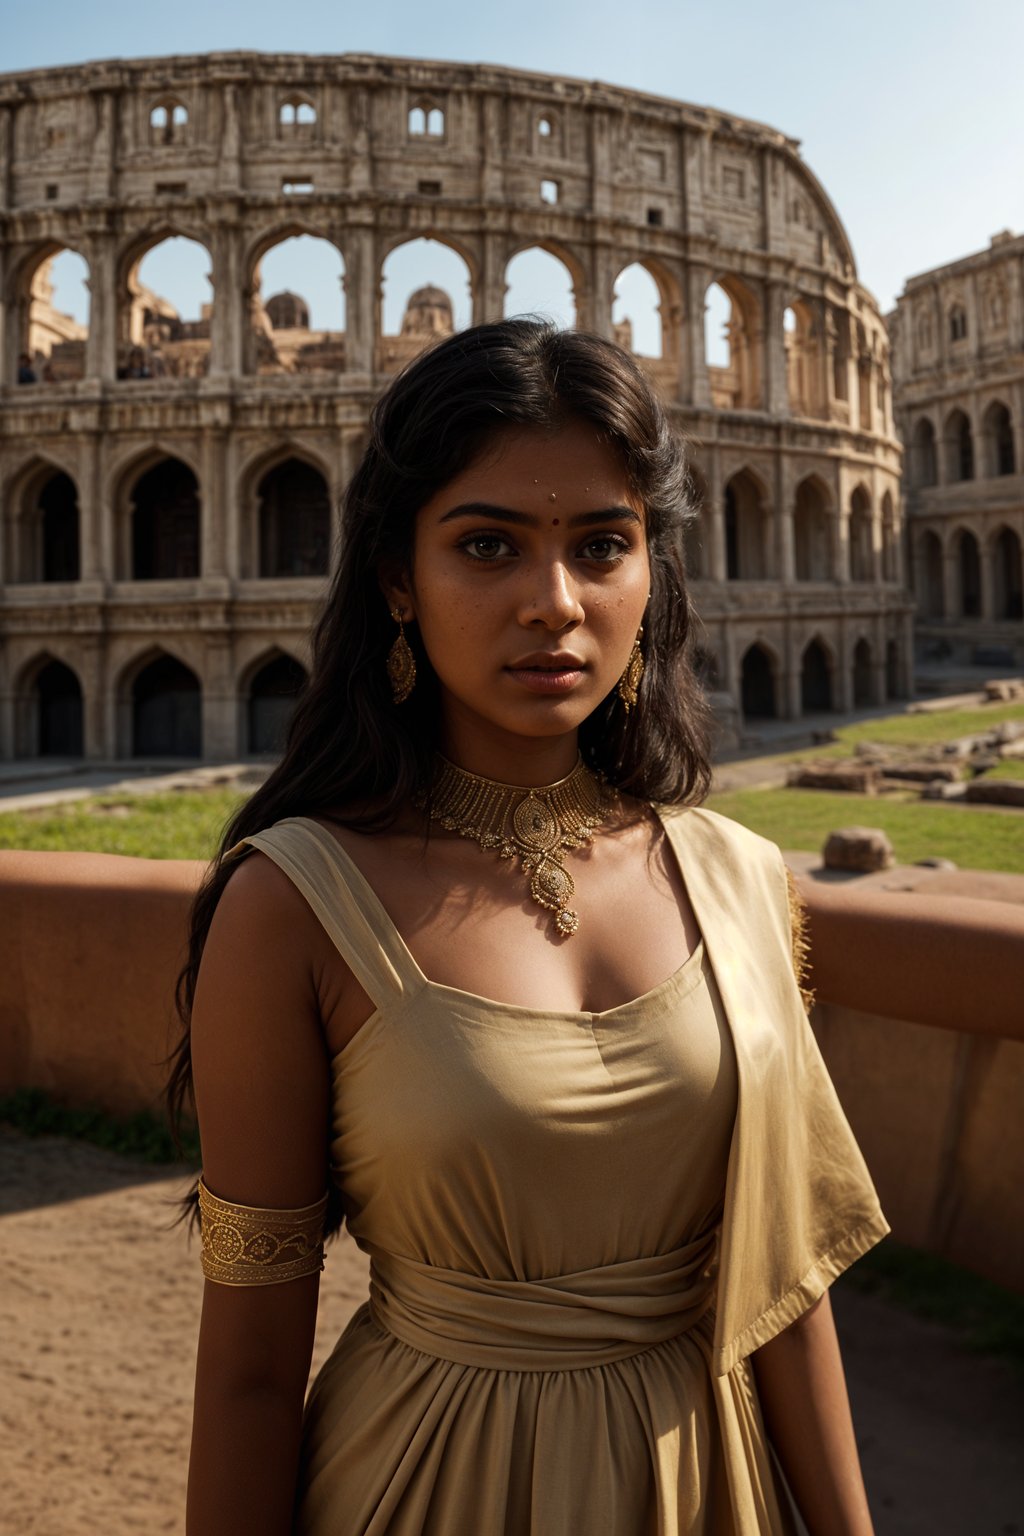 stunning and historical  woman in Rome wearing a traditional Roman stola/toga, Colosseum in the background